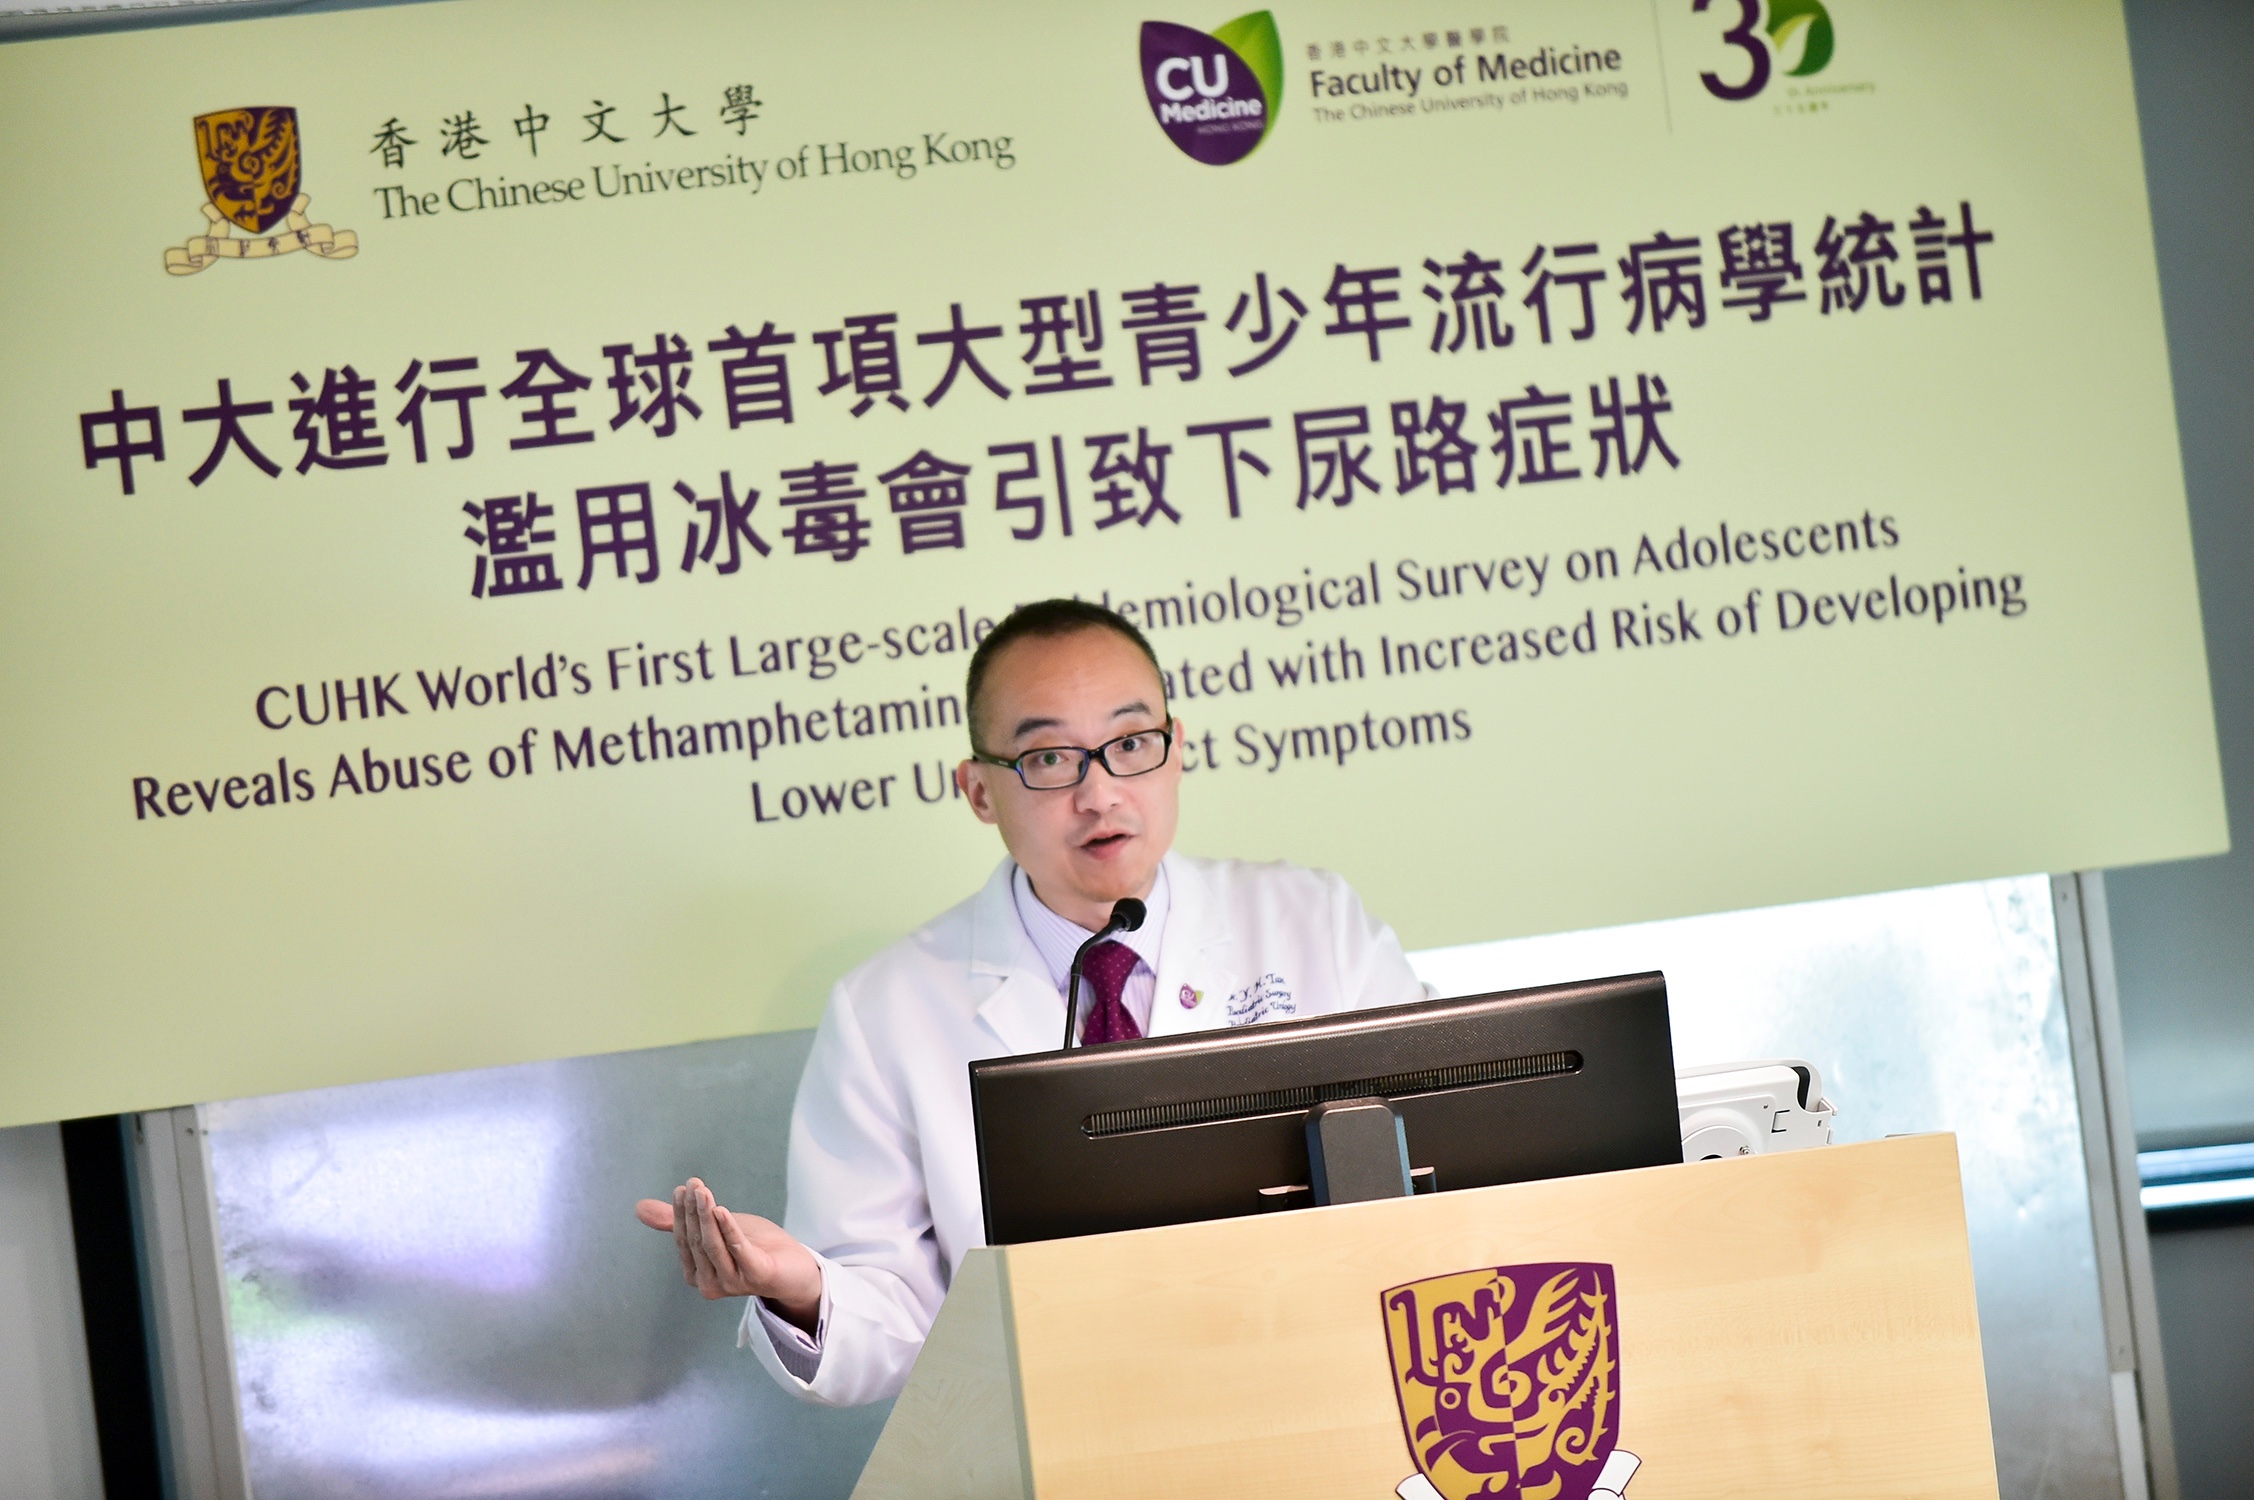 Dr. Yuk Him TAM, Clinical Associate Professor (honorary), Division of Paediatric Surgery & Paediatric Urology, Department of Surgery, Faculty of Medicine, CUHK and Co-Director of Youth Urological Treatment Clinic hopes this study help dispel the myth that ‘Methamphetamine is safer than Ketamine for the urinary tract. 